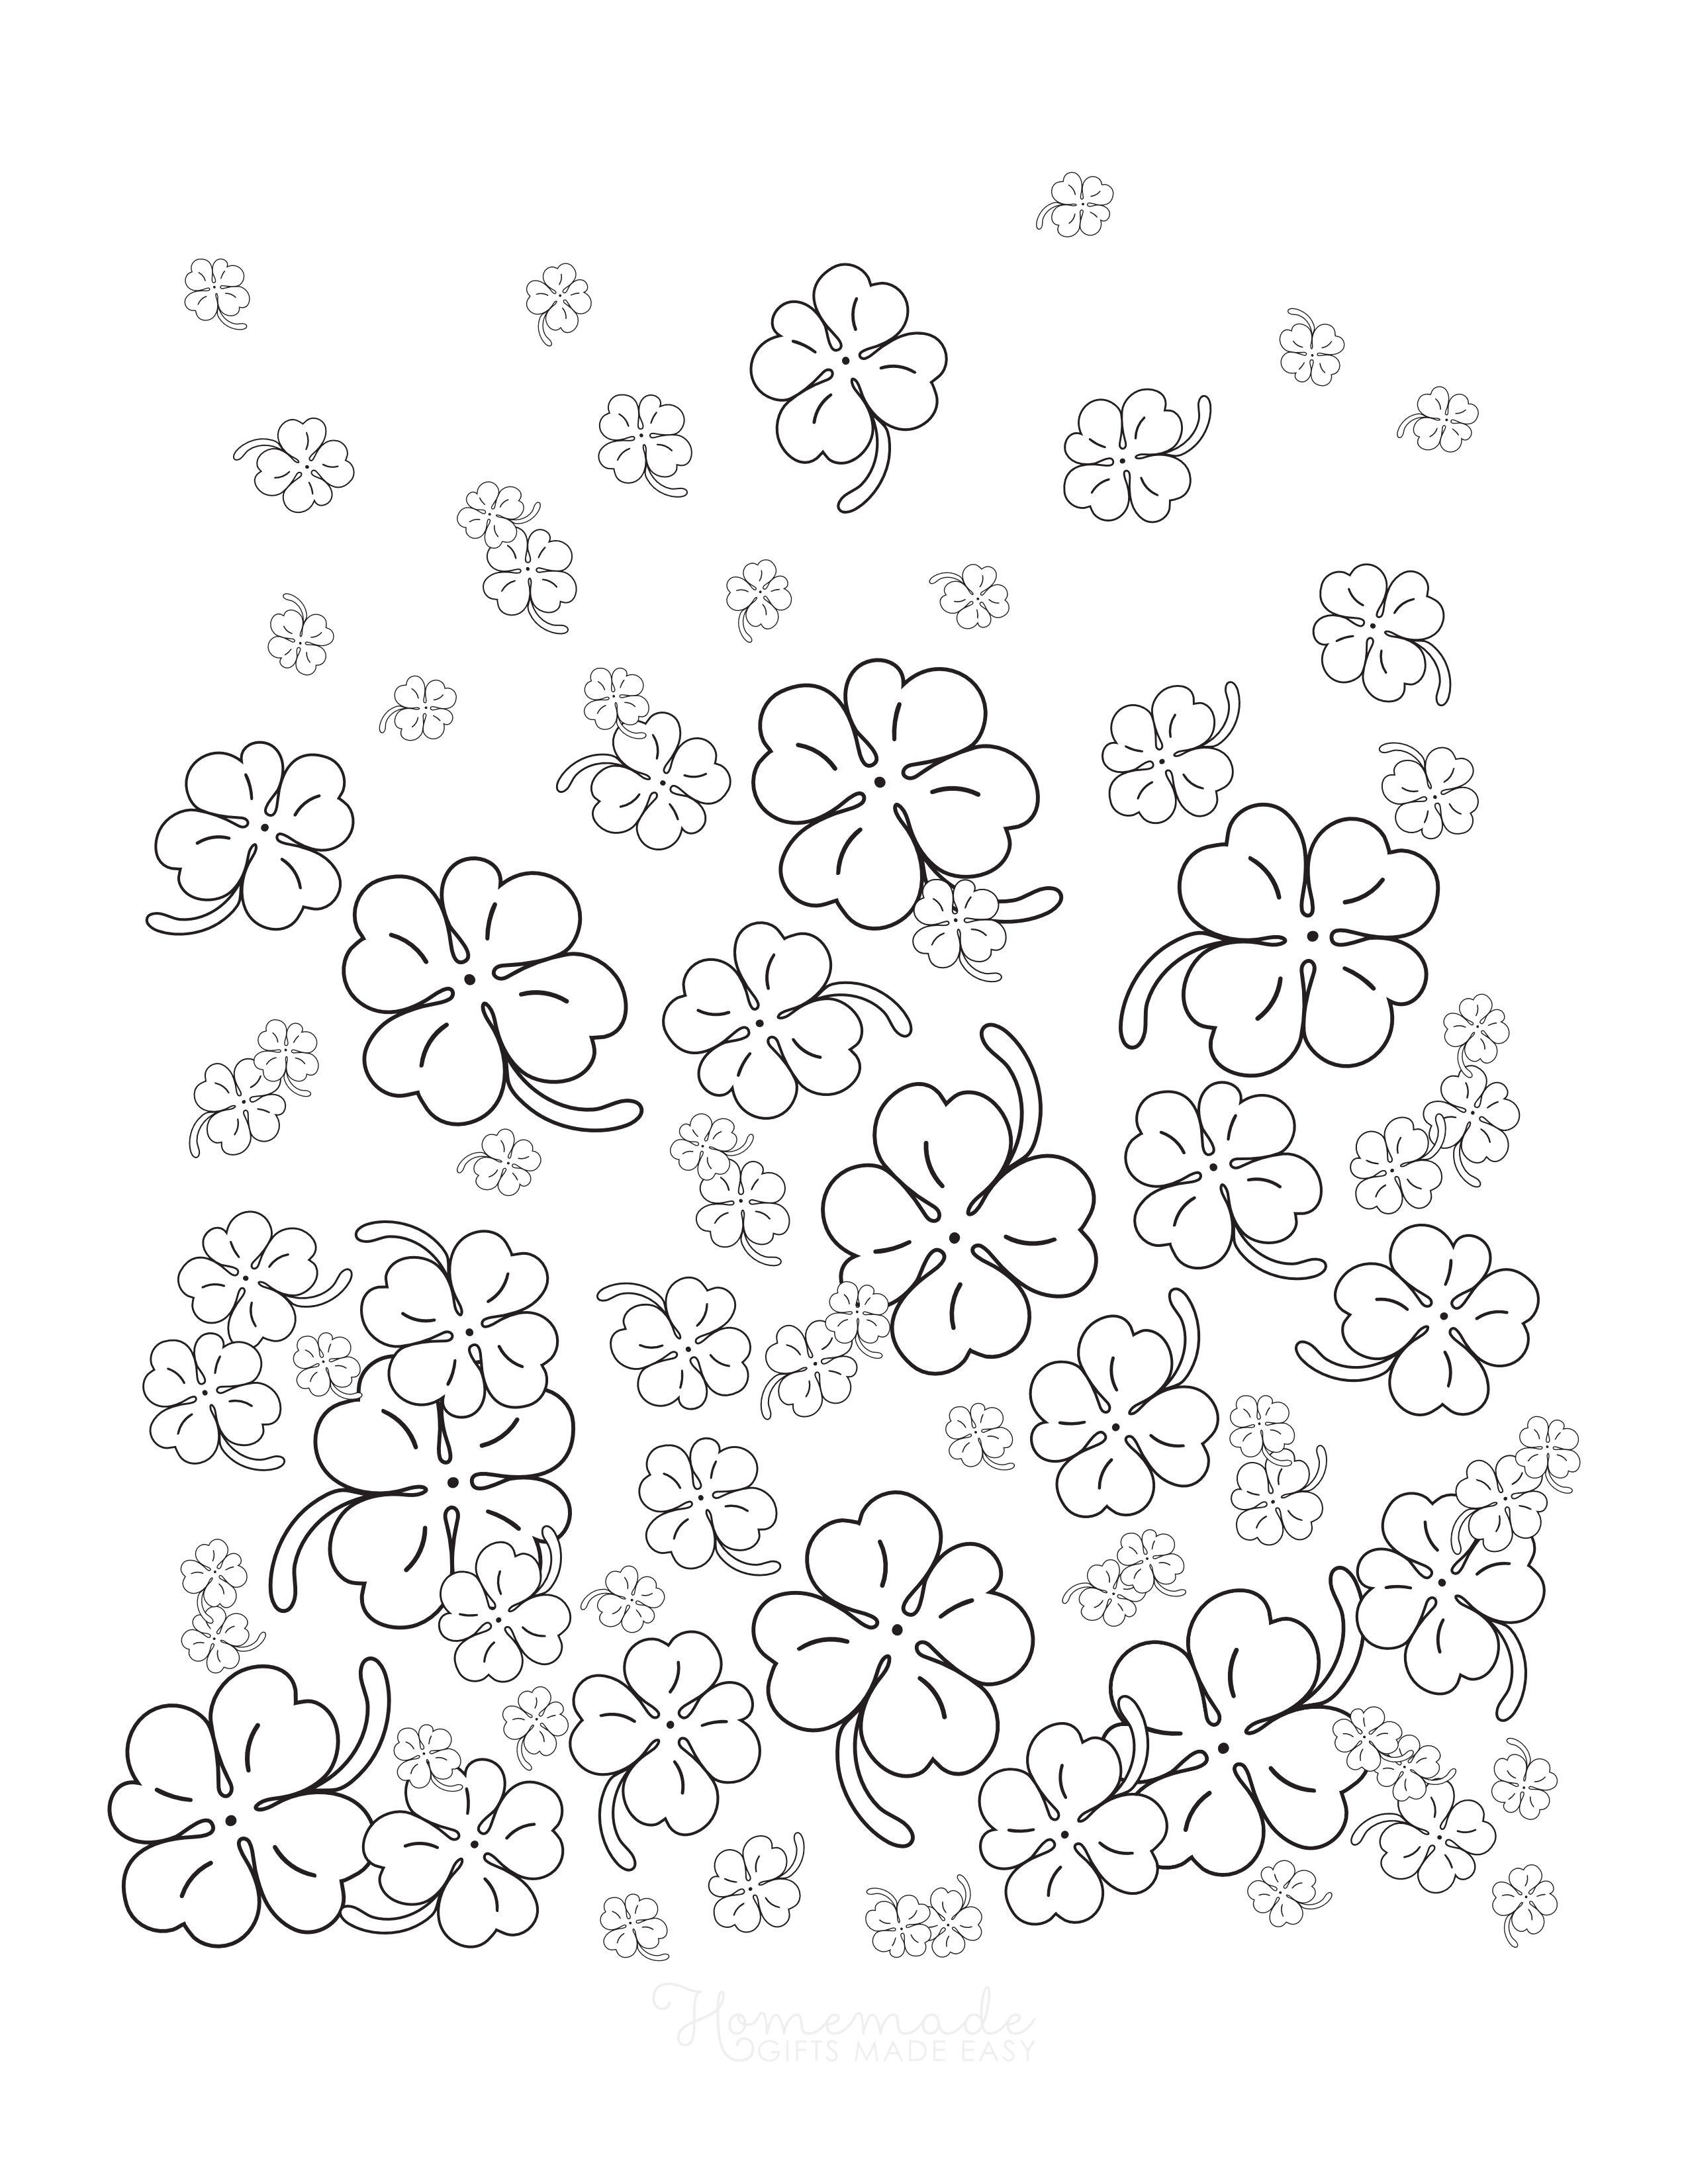 Four leaves clover shamrocks Coloring Pages